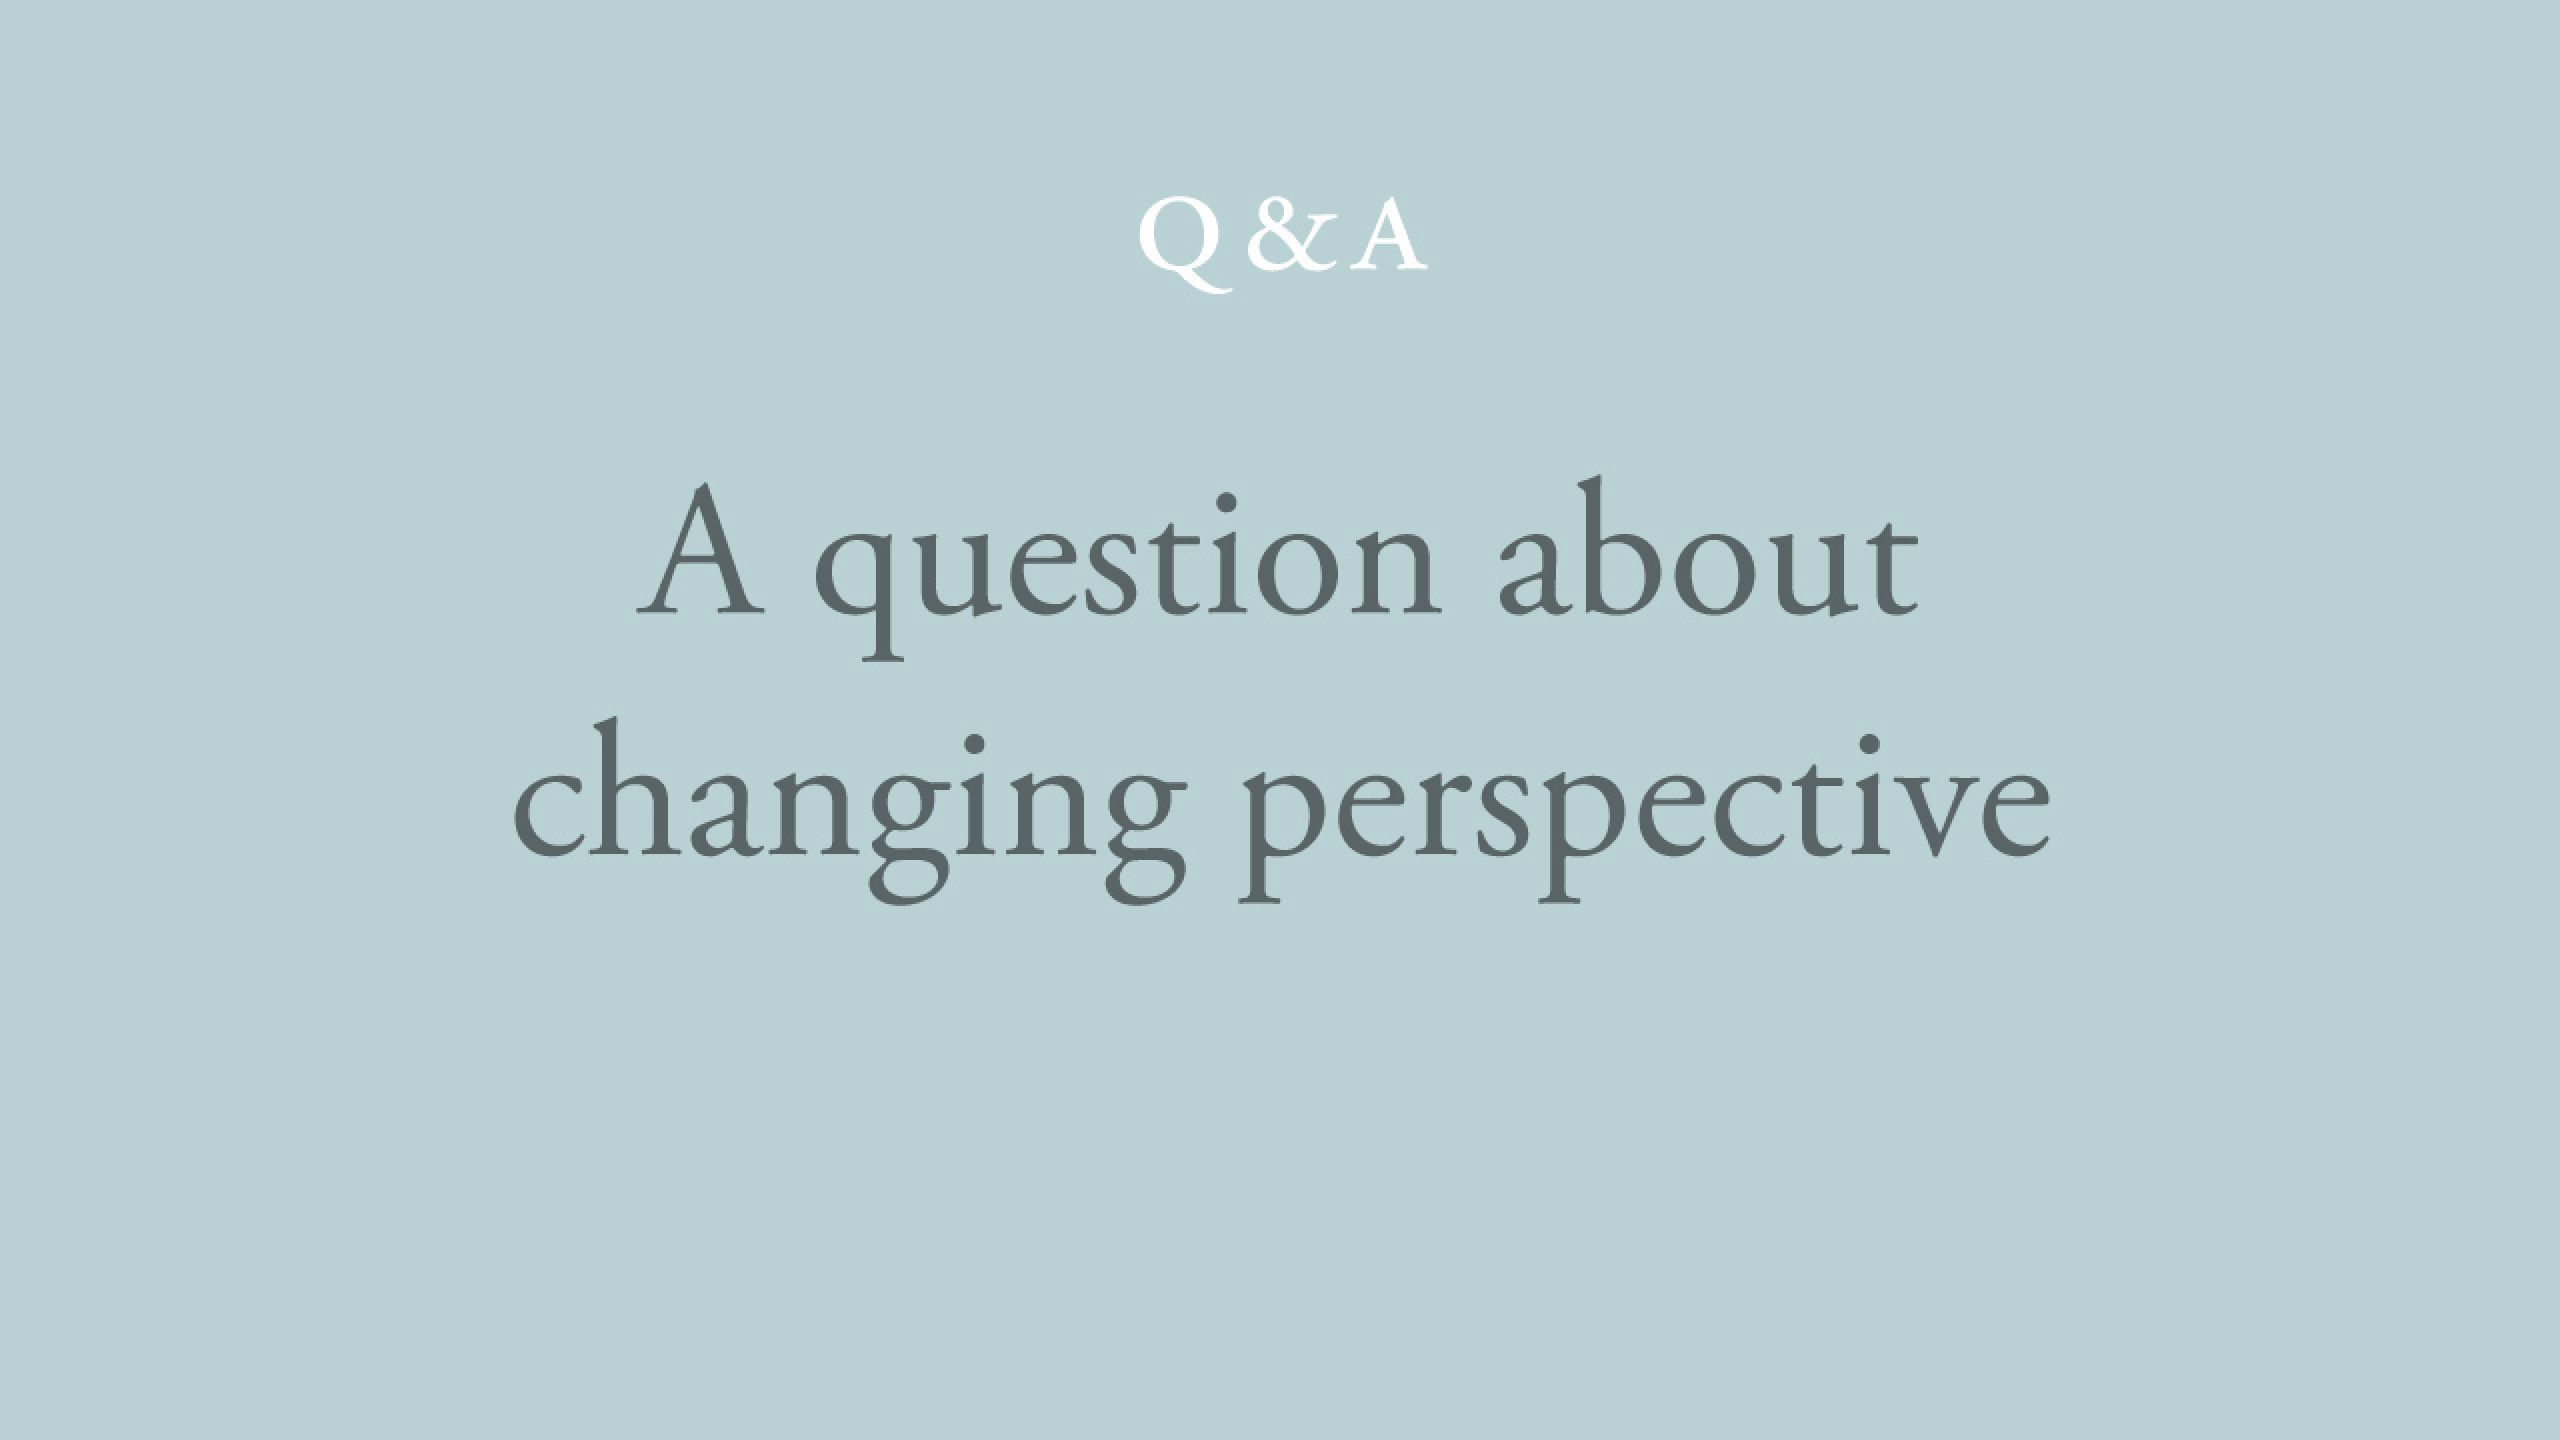 What is the non-dual view of changing one's perspective on a person or situation? 